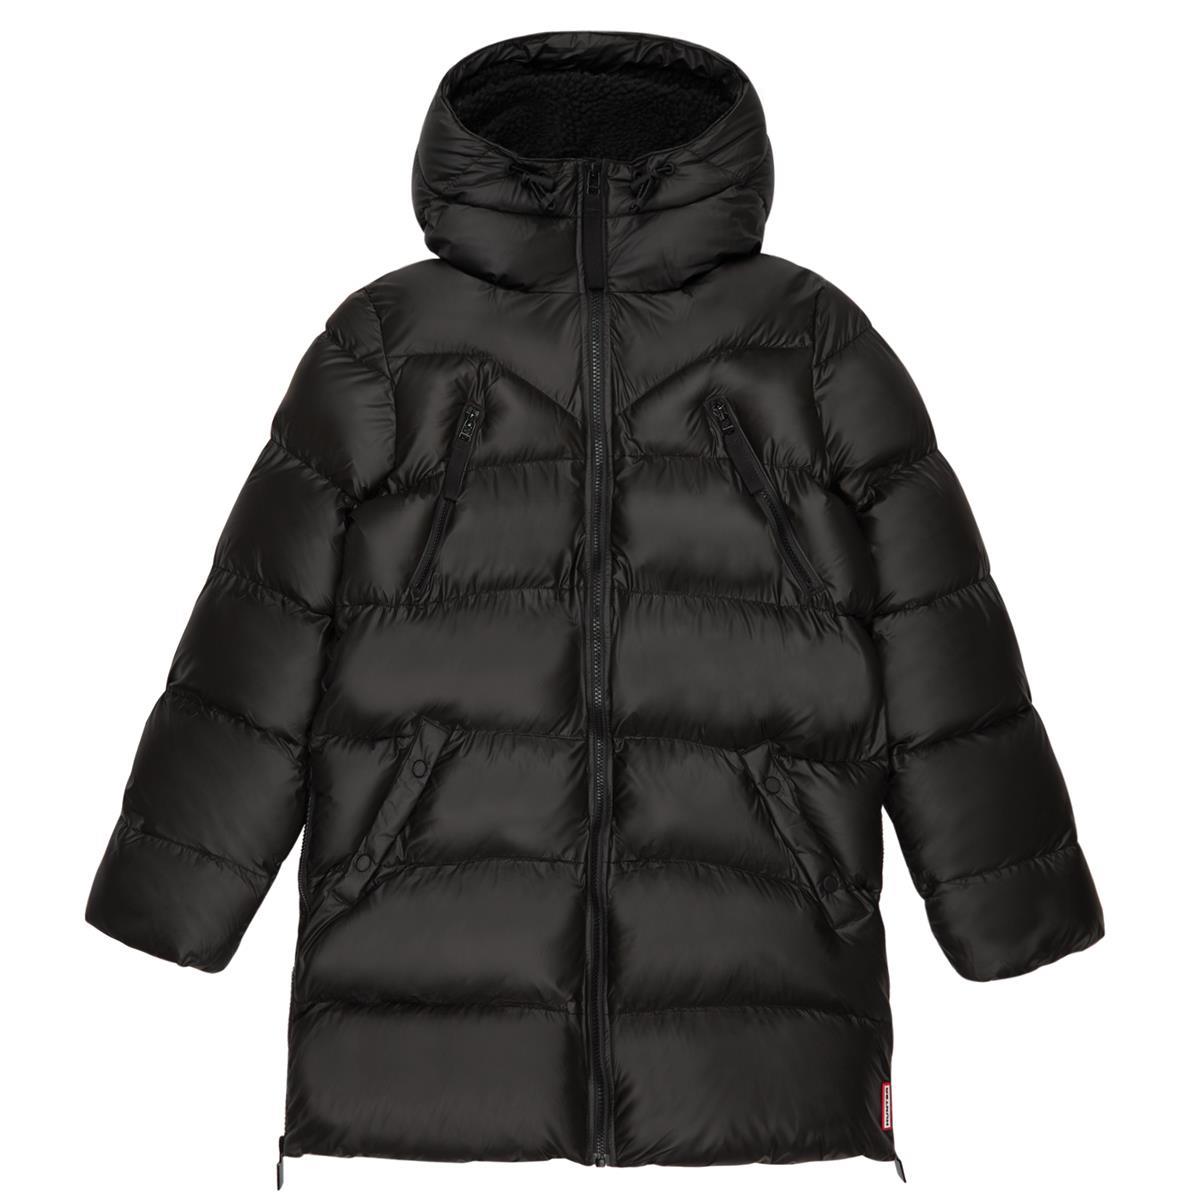 What occurred with the Hunter puffer jacket for women?